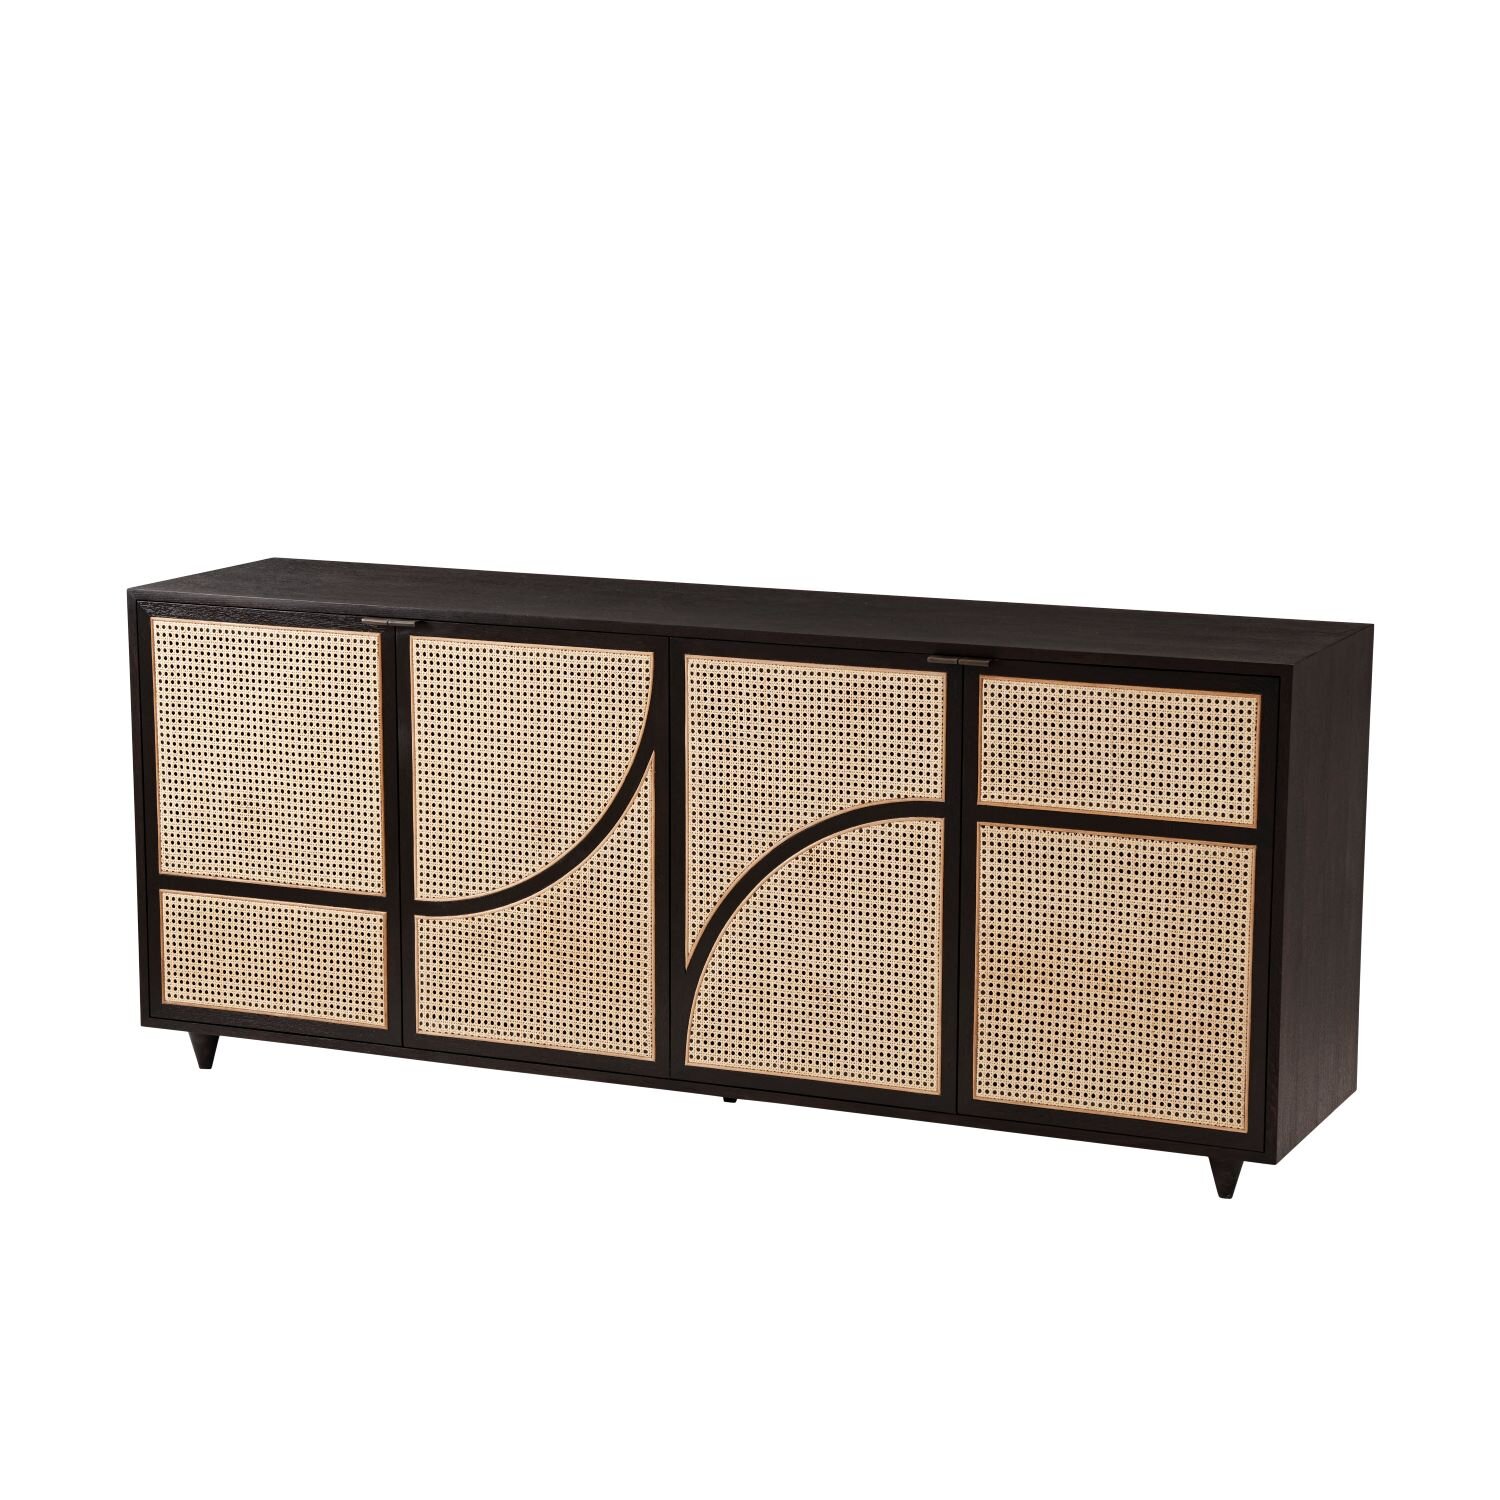 Impulso credenza sideboard, oak and woven cane paneled doors with “wave” details, Theodore Alexander